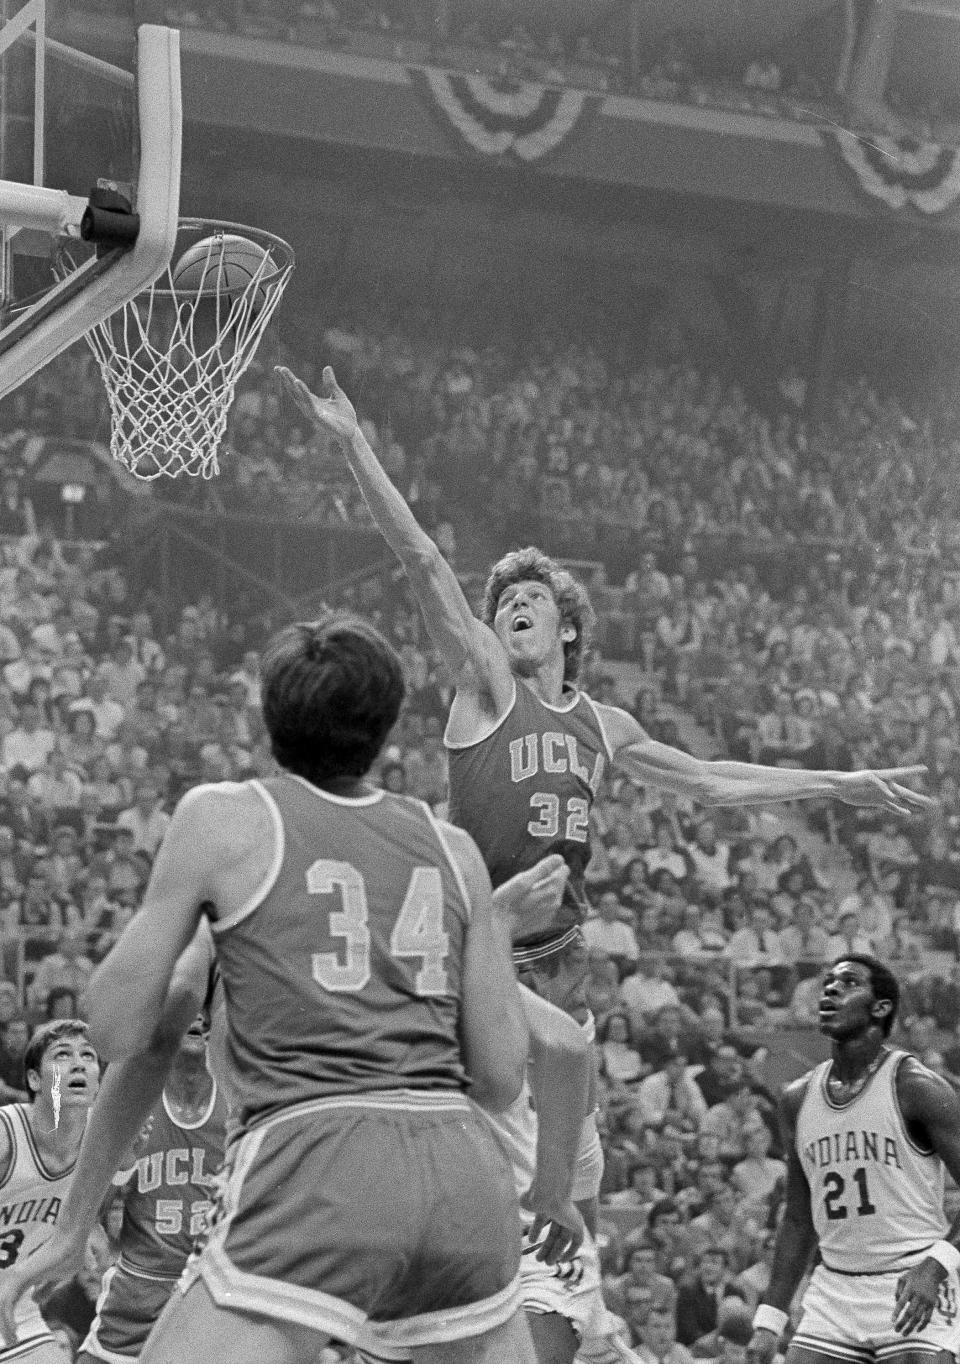 FILE - UCLA center Bill Walton goes to the basket against Indiana during the semifinal game of Final Four NCAA college basketball championship in St. Louis, March 24, 1973. At left foreground is UCLA's Dave Meyers, and Indiana center Steve Downing is at right. UCLA won, 70-59. (AP Photo/File)